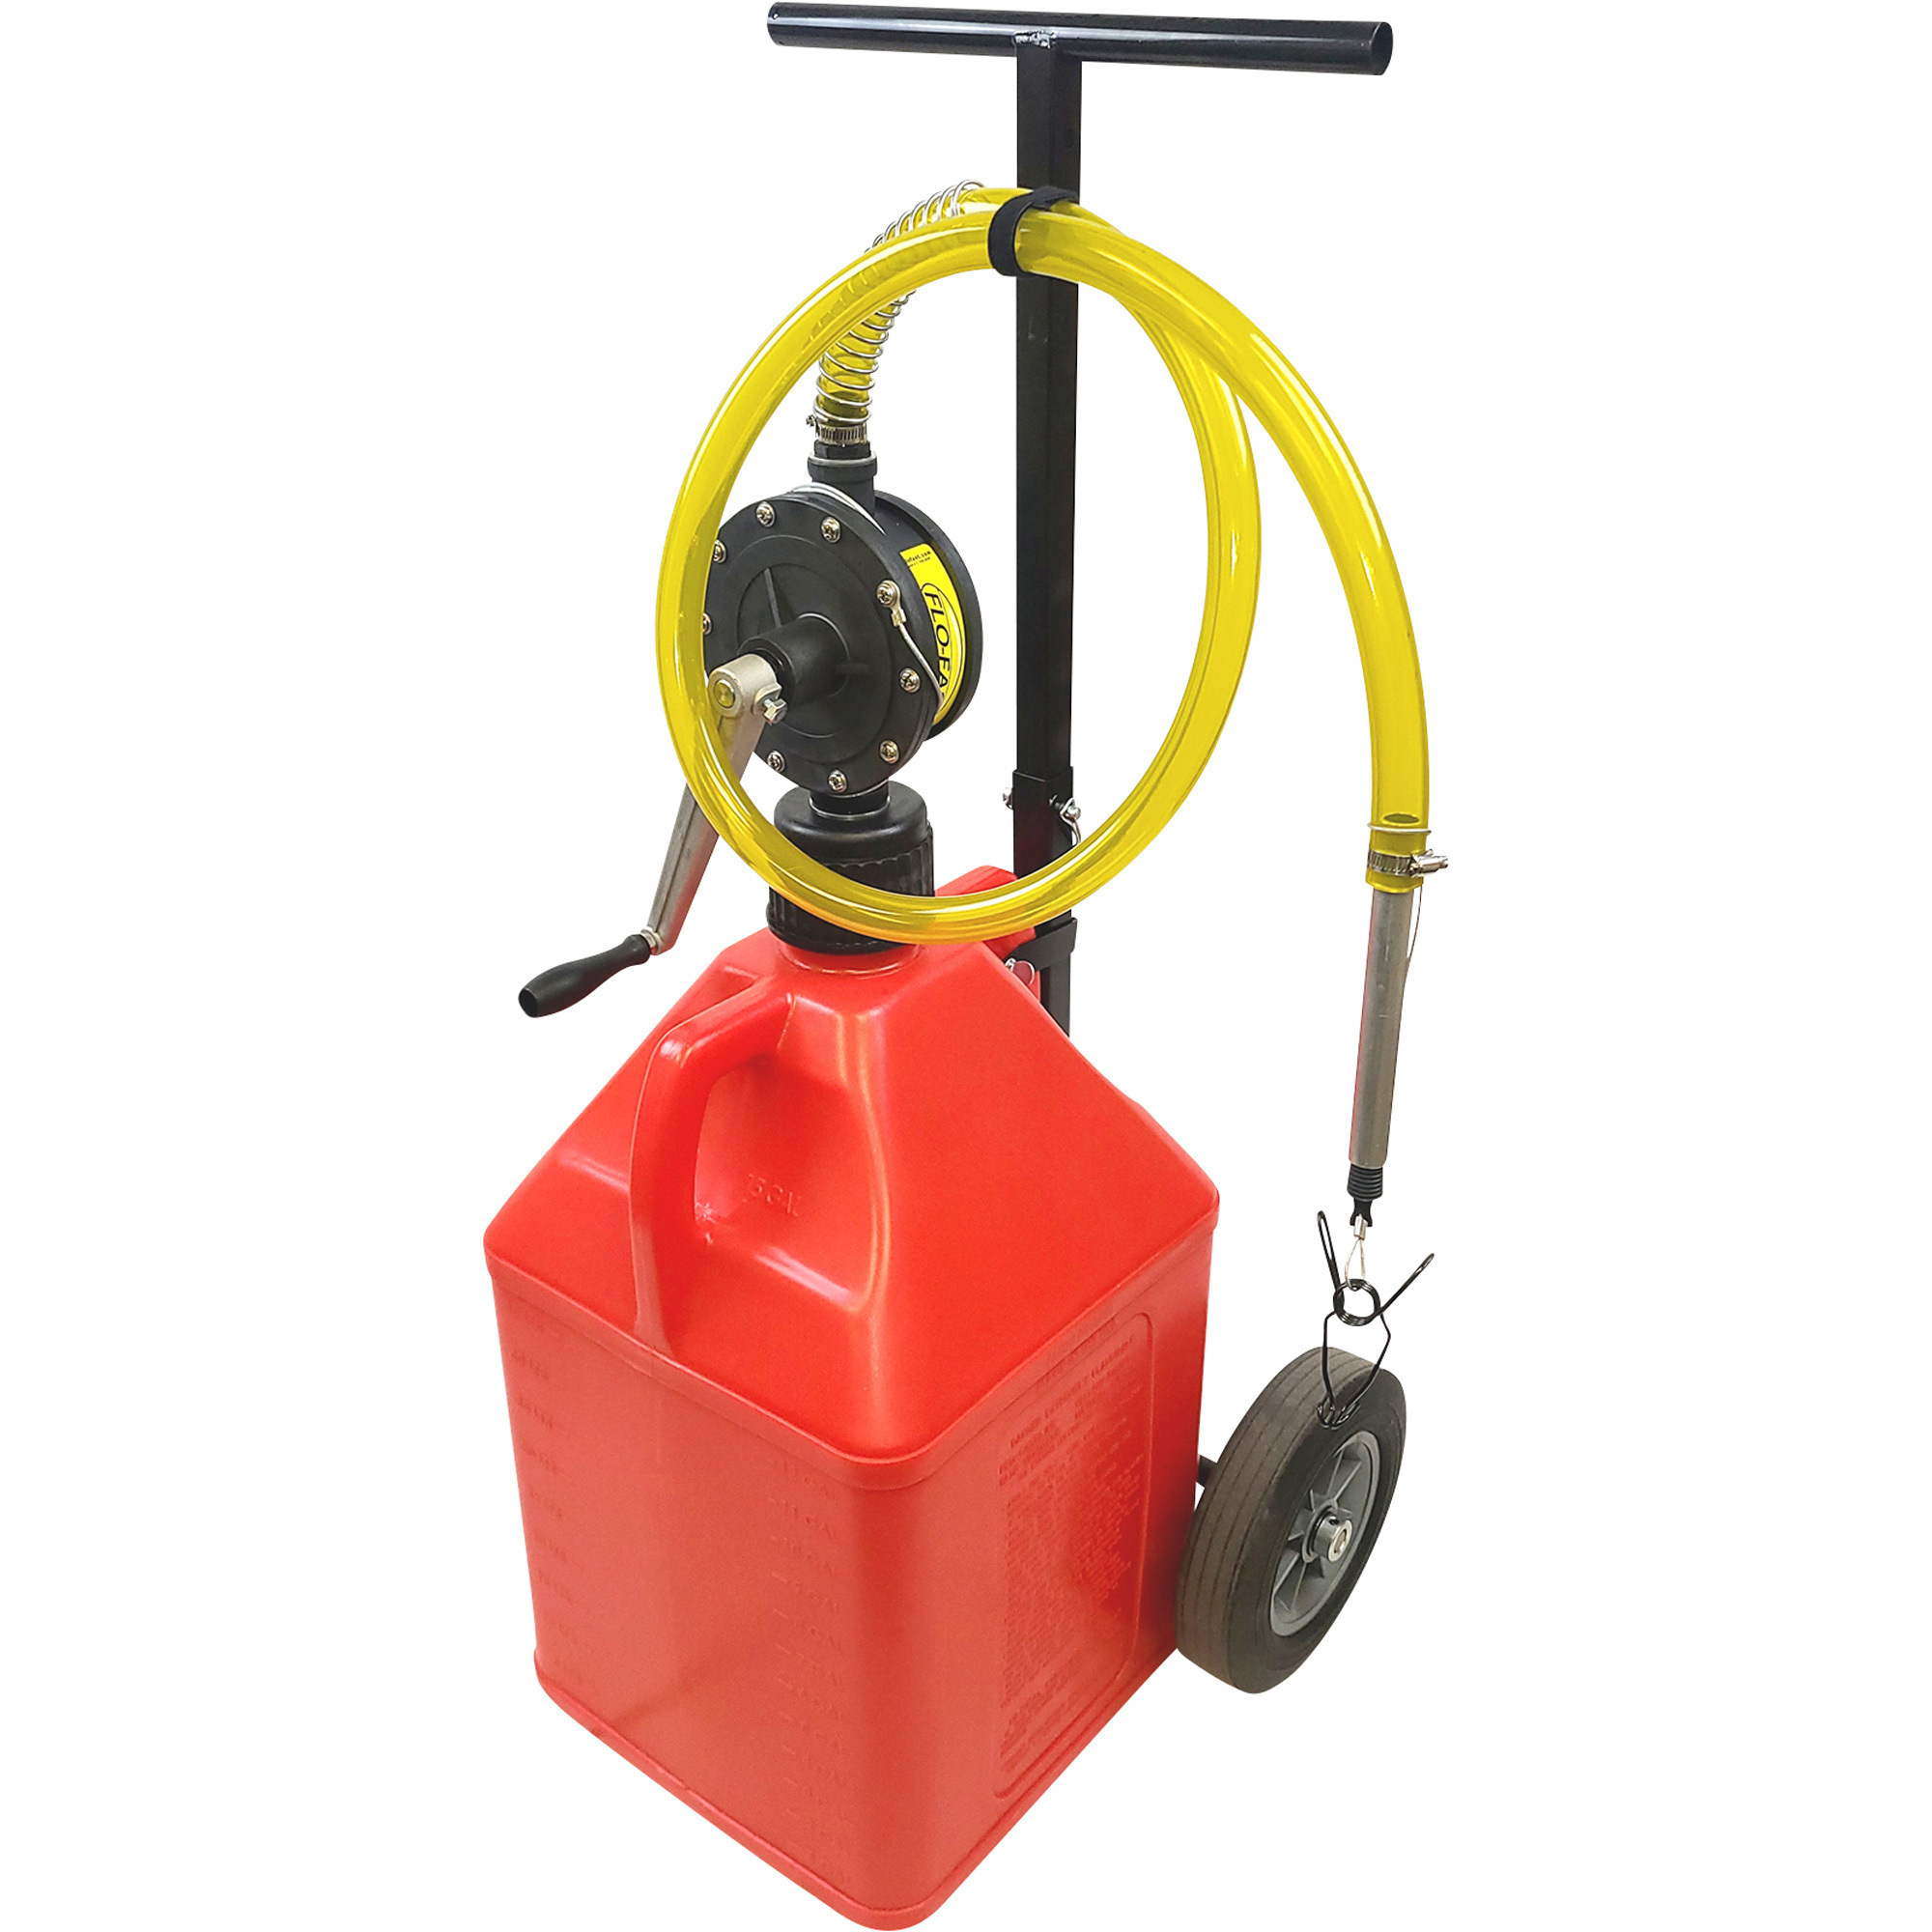 FLO-FAST Gas Container With Pump and Cart, 15 Gallons, Red, for Gasoline, Model 30150-R